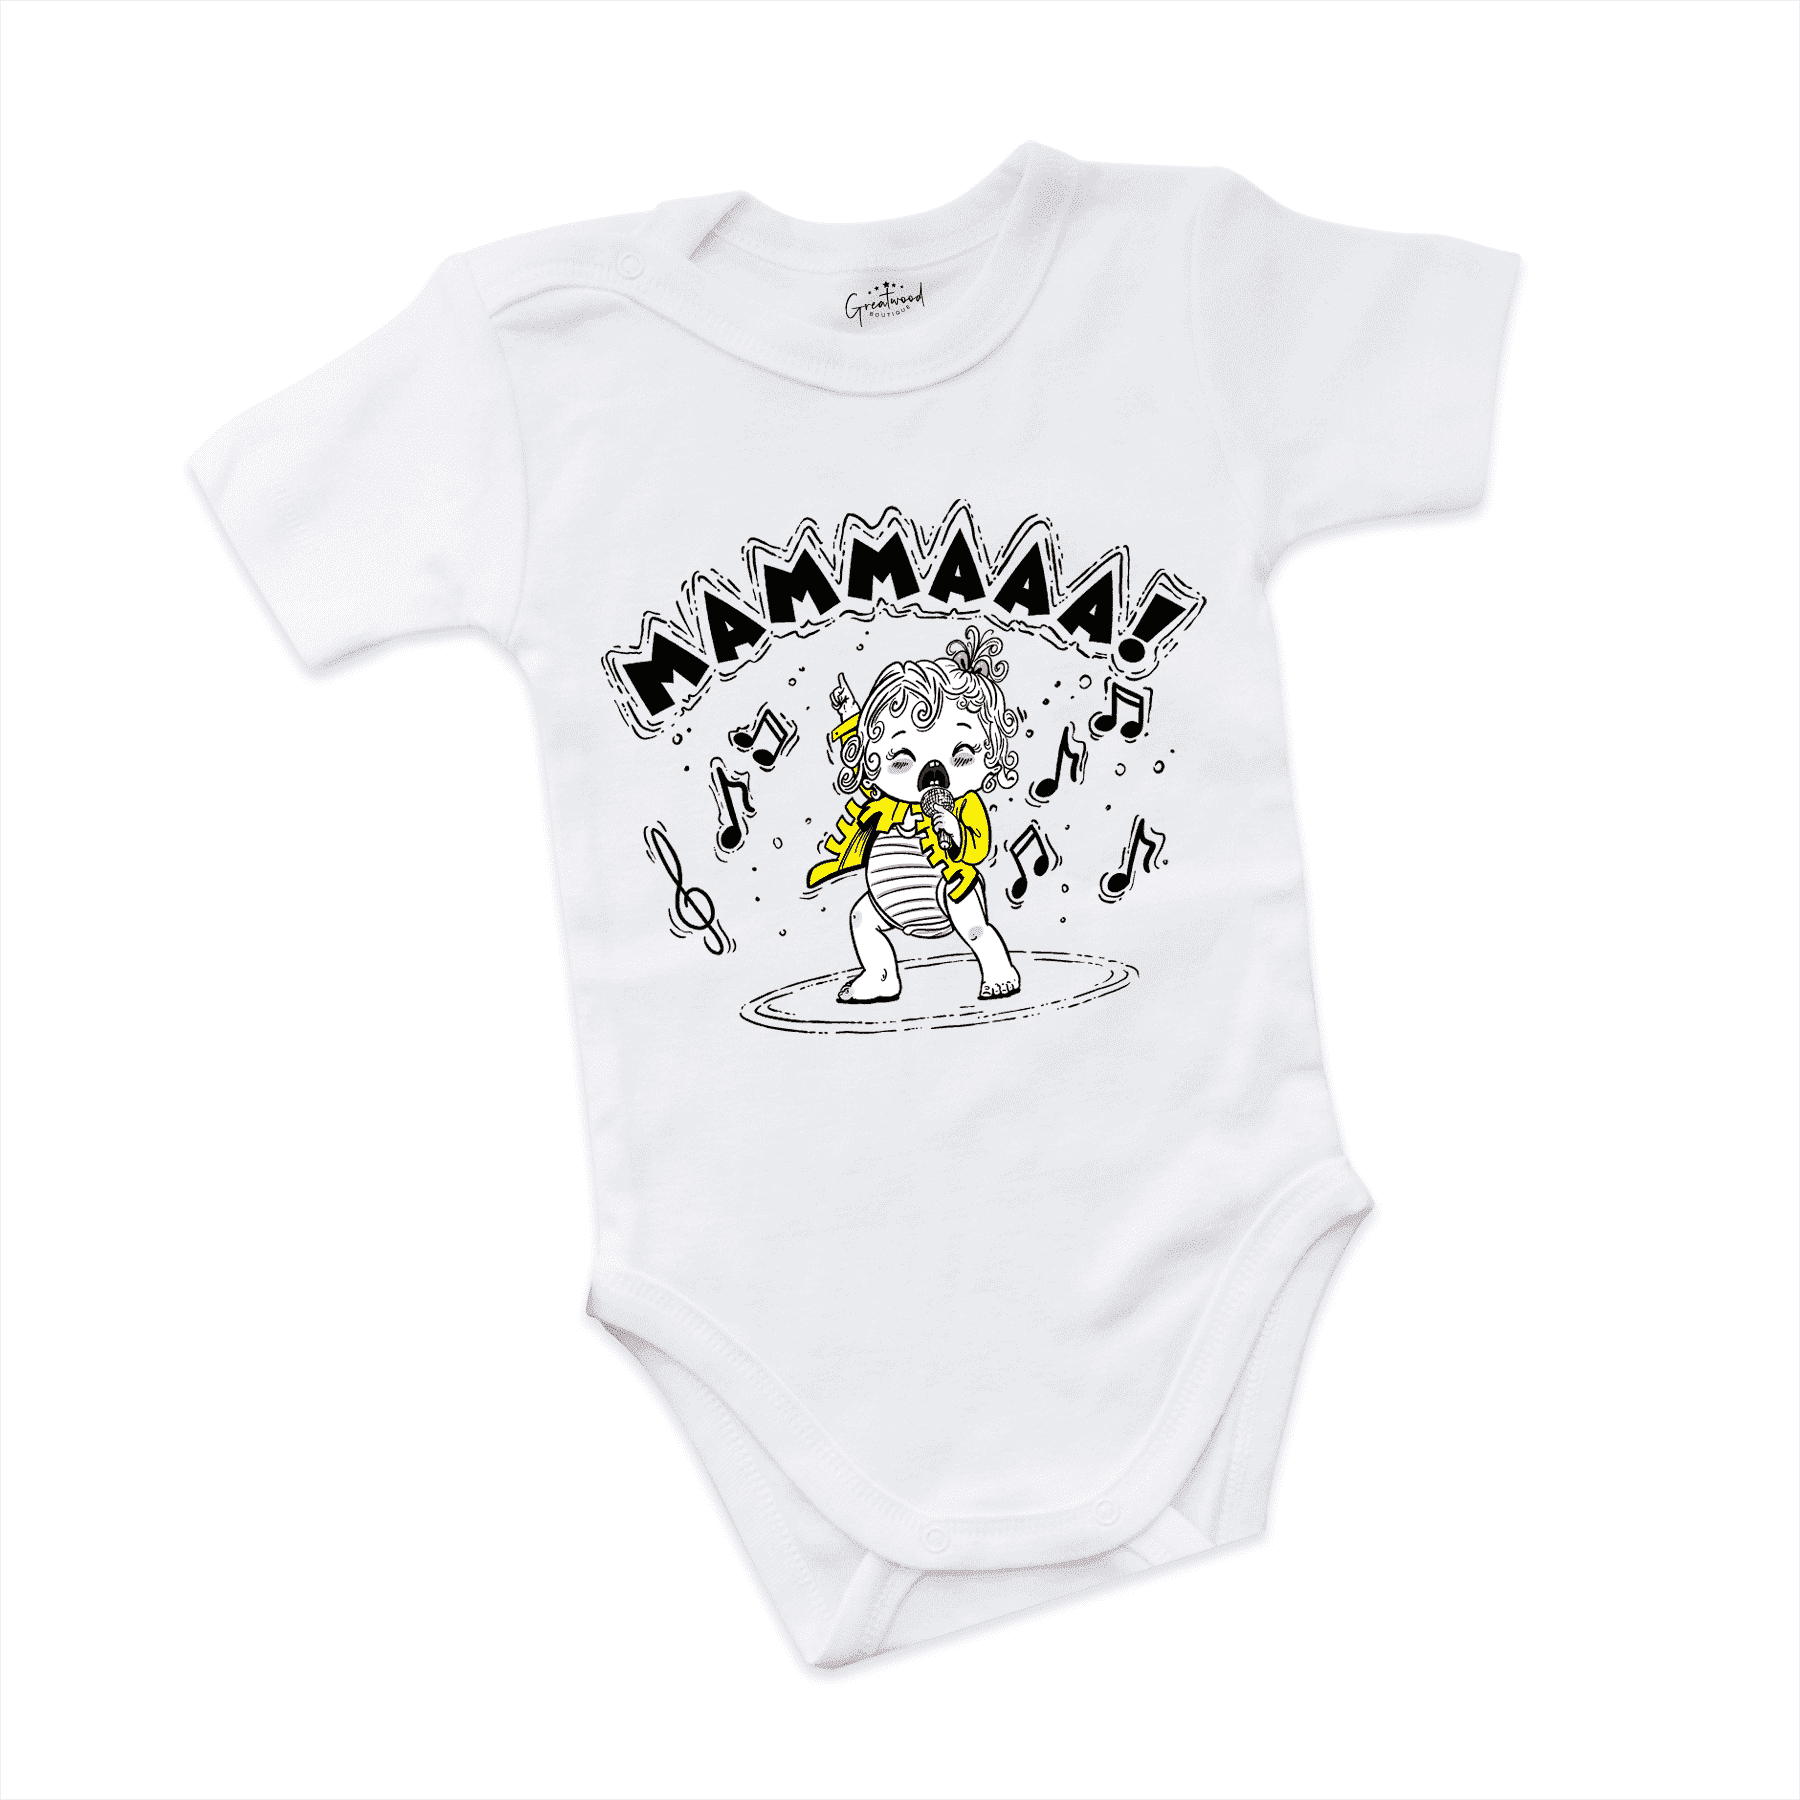 Mammaaa Baby Onesie White - Greatwood Boutique